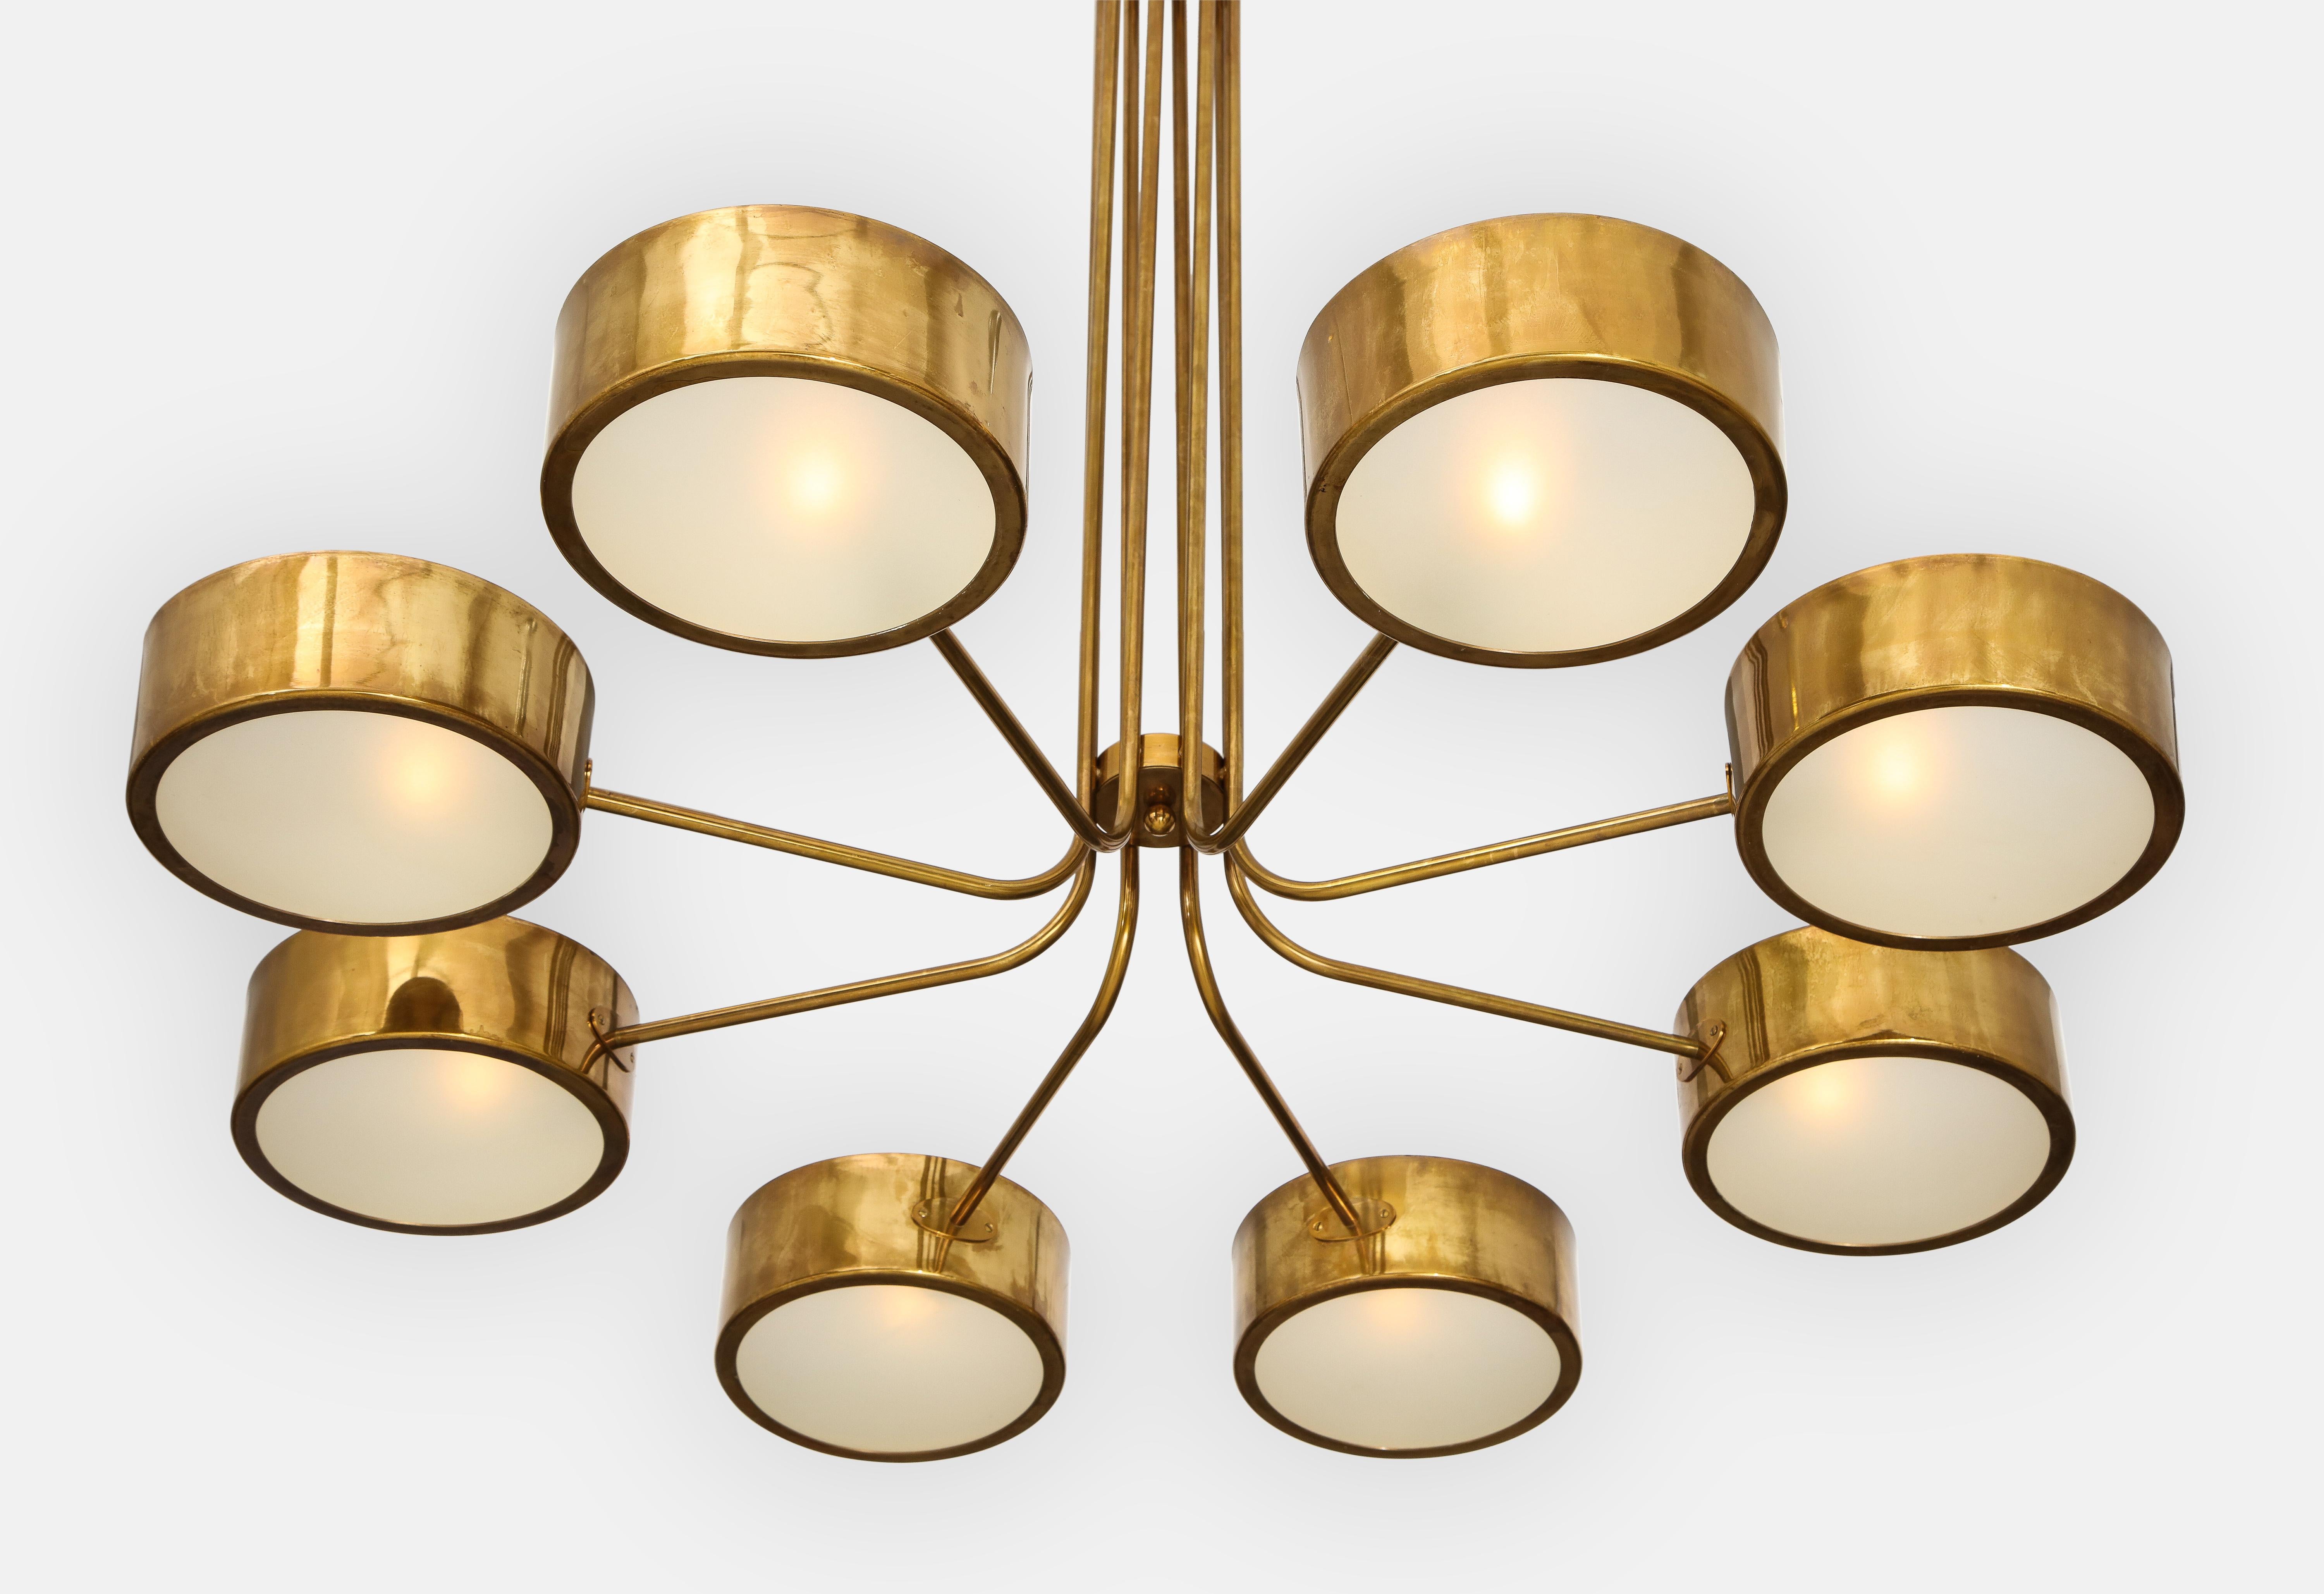 Stilnovo striking large chandelier consisting of original disc canopy with eight long brass arms dropping around a similar central disc decoration ending in circular brass and inset frosted glass shades, Italy, circa 1960.